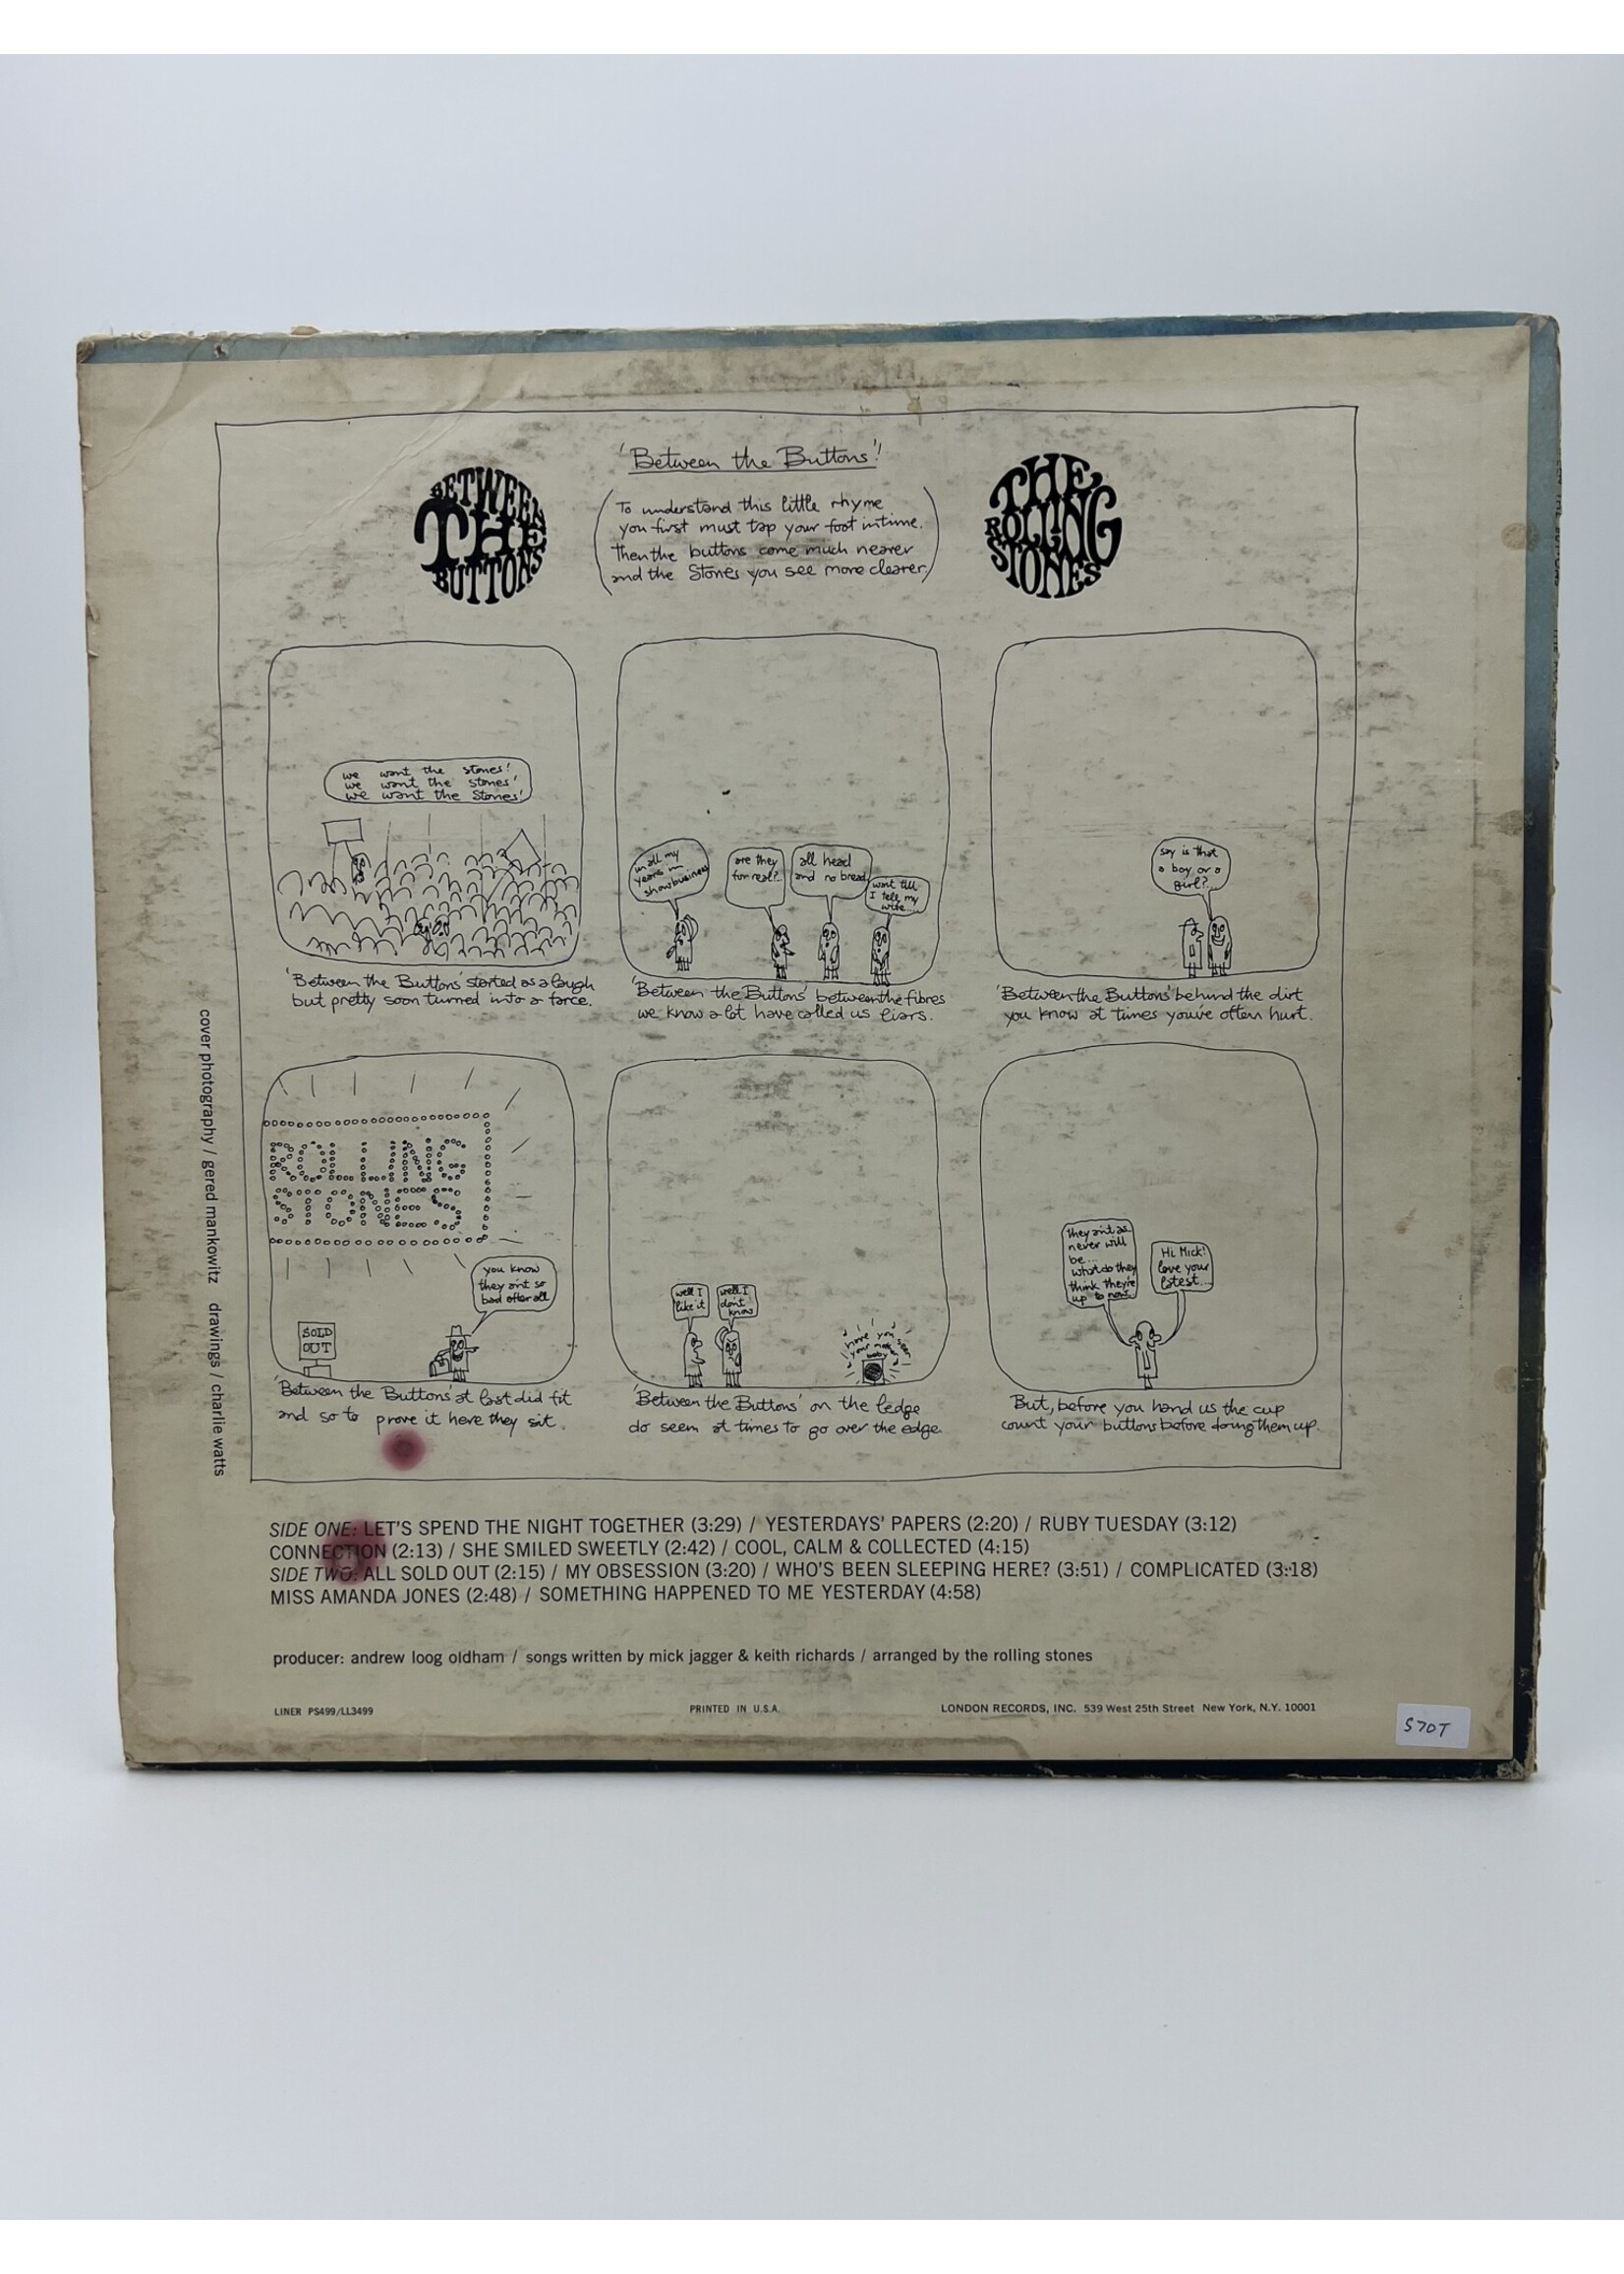 LP The Rolling Stones Between The Buttons LP Record